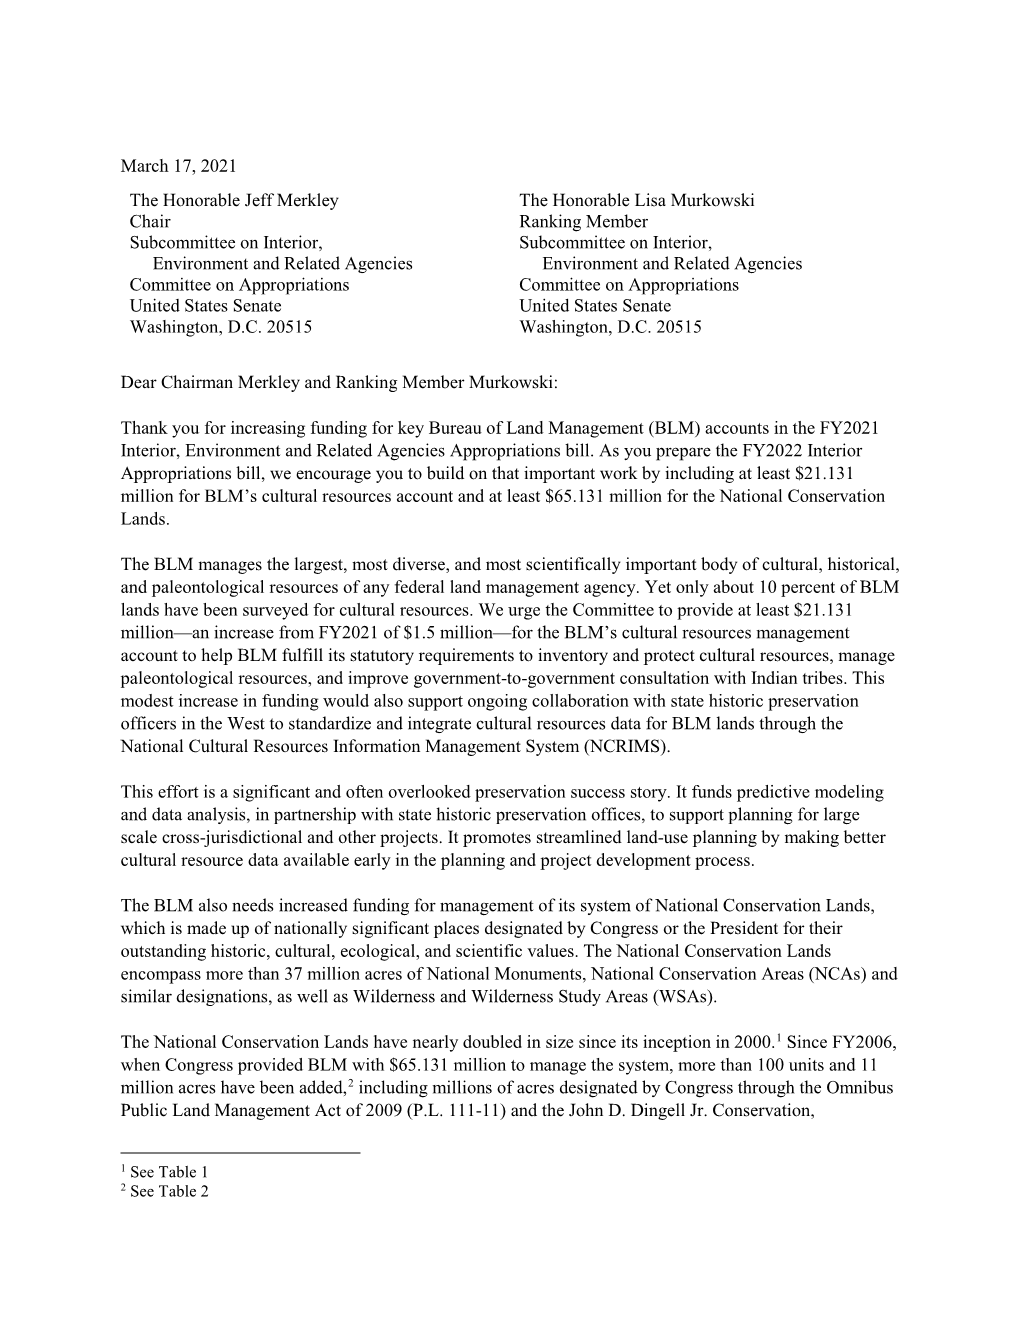 Letter to Senate Appropriations Interior Subcommittee FY22 BLM